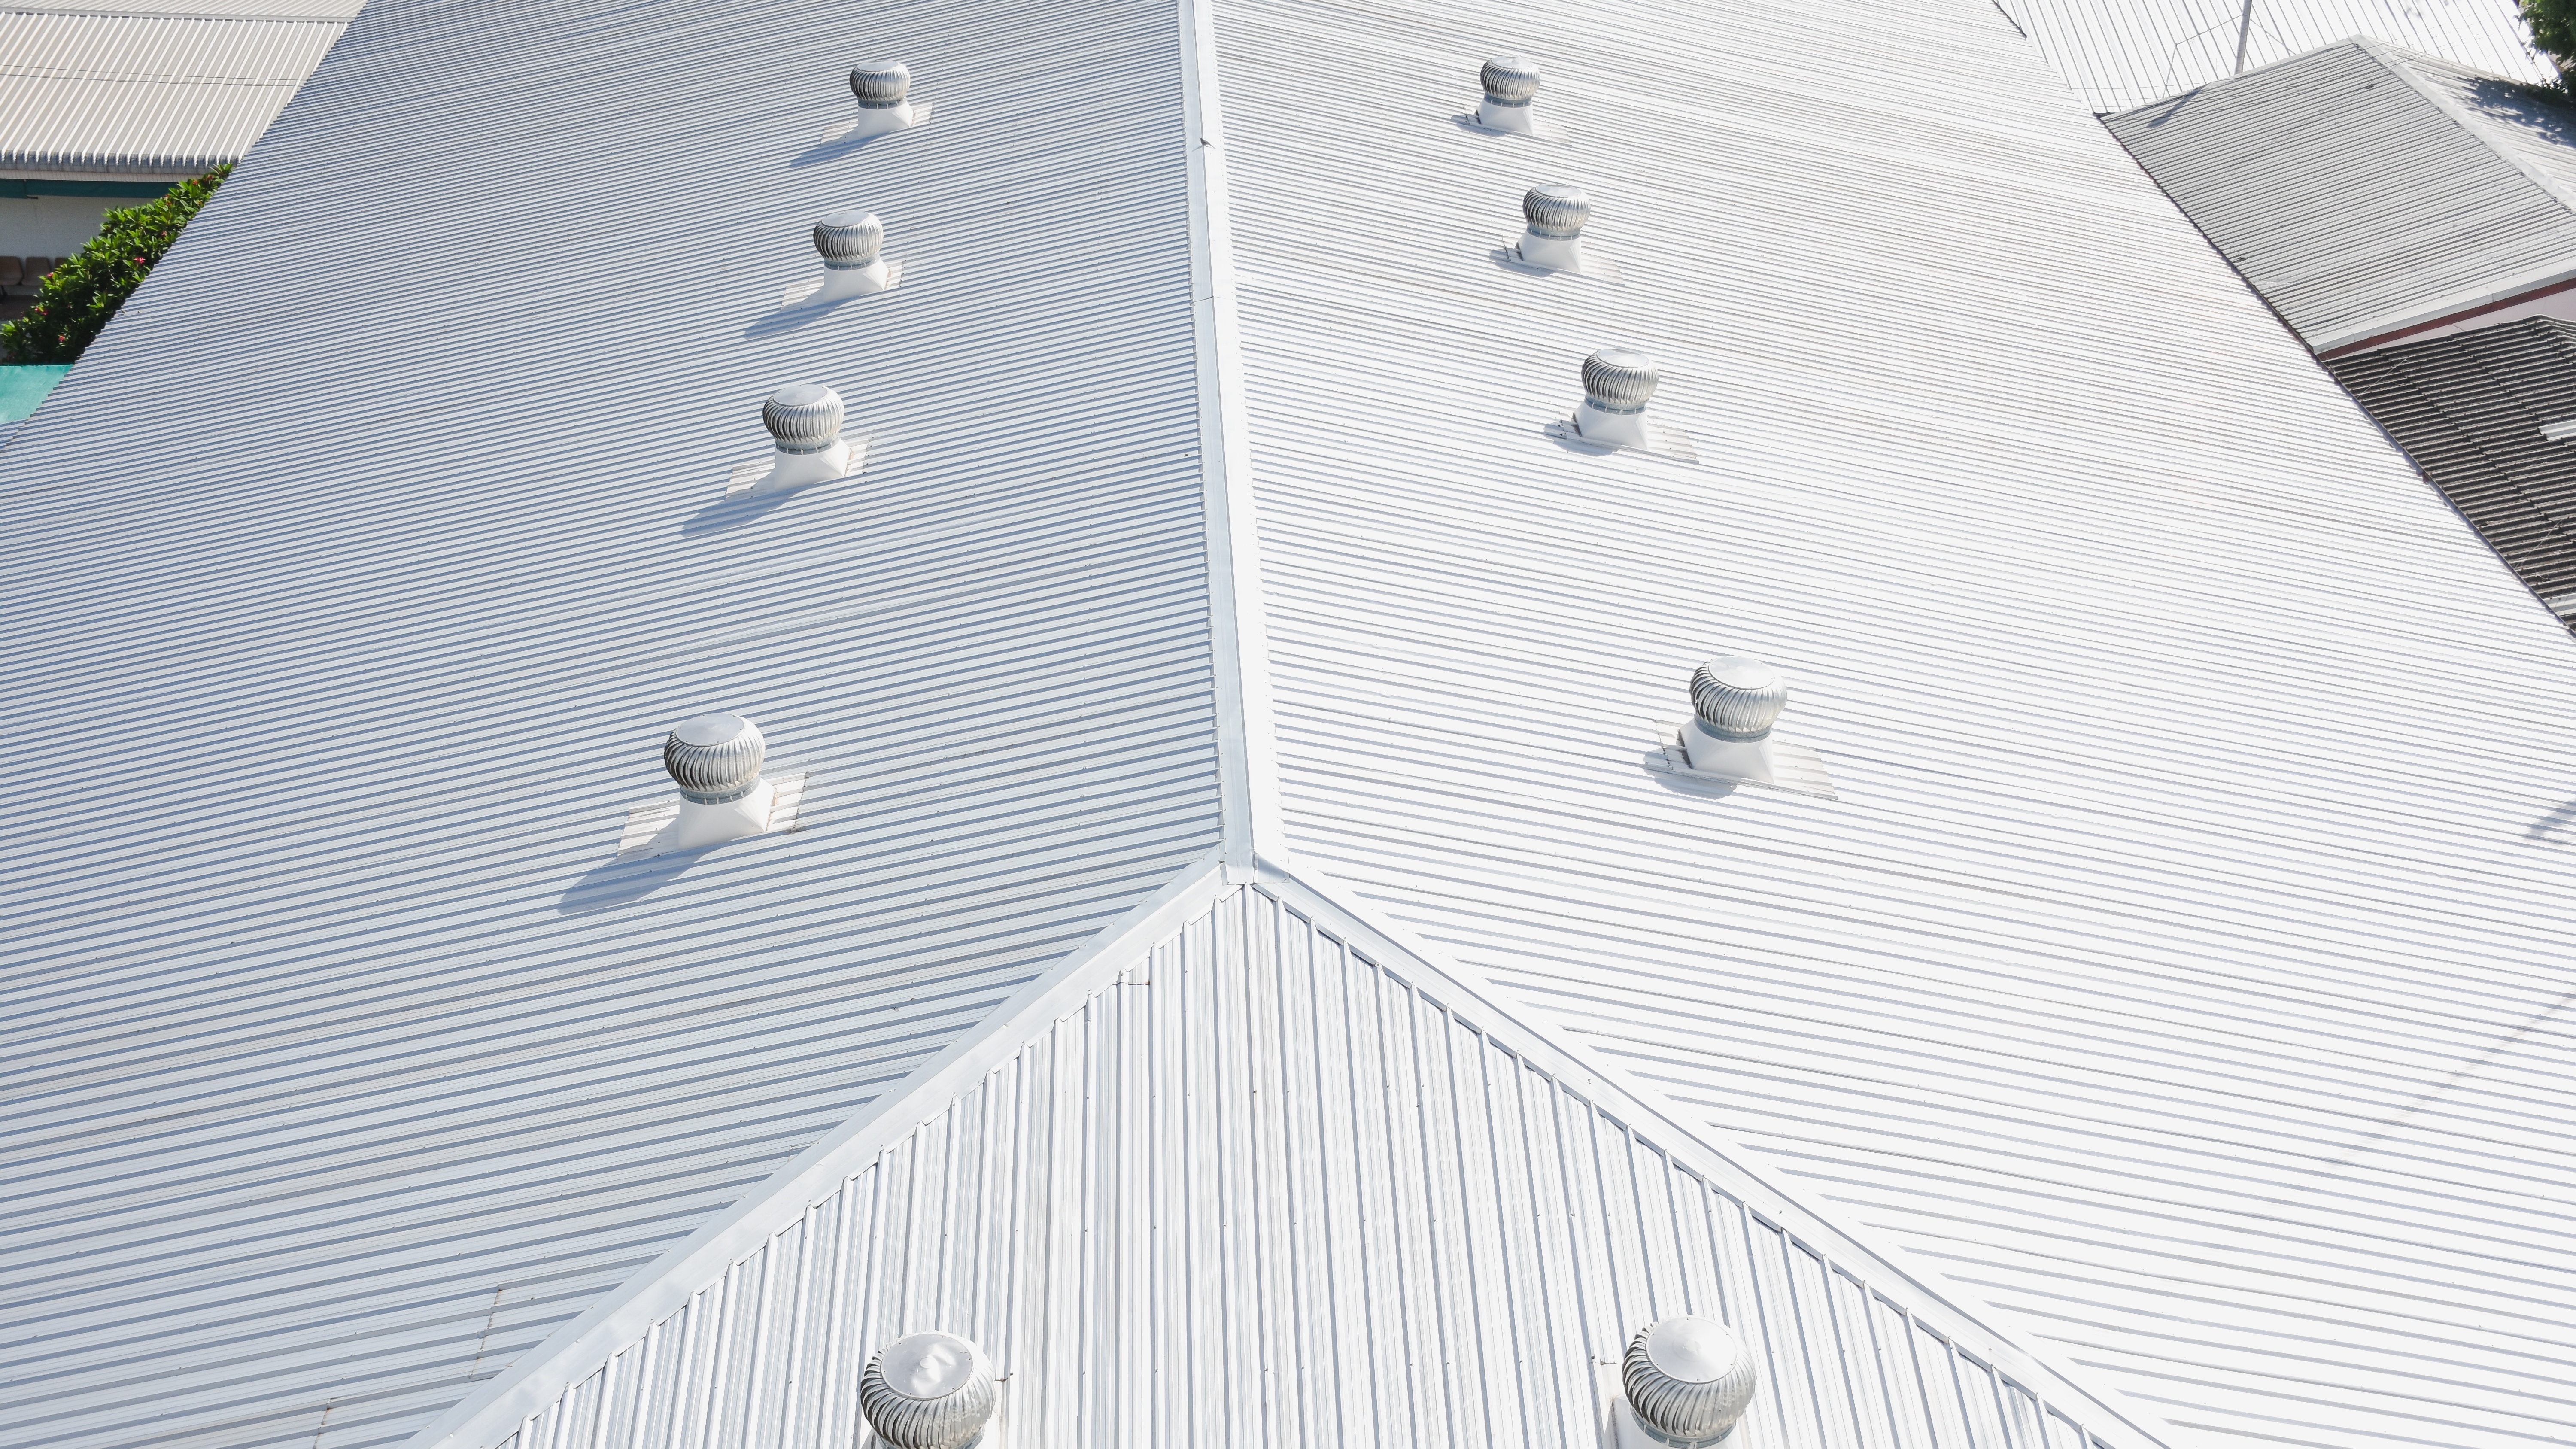 A white metal commercial roof with vents